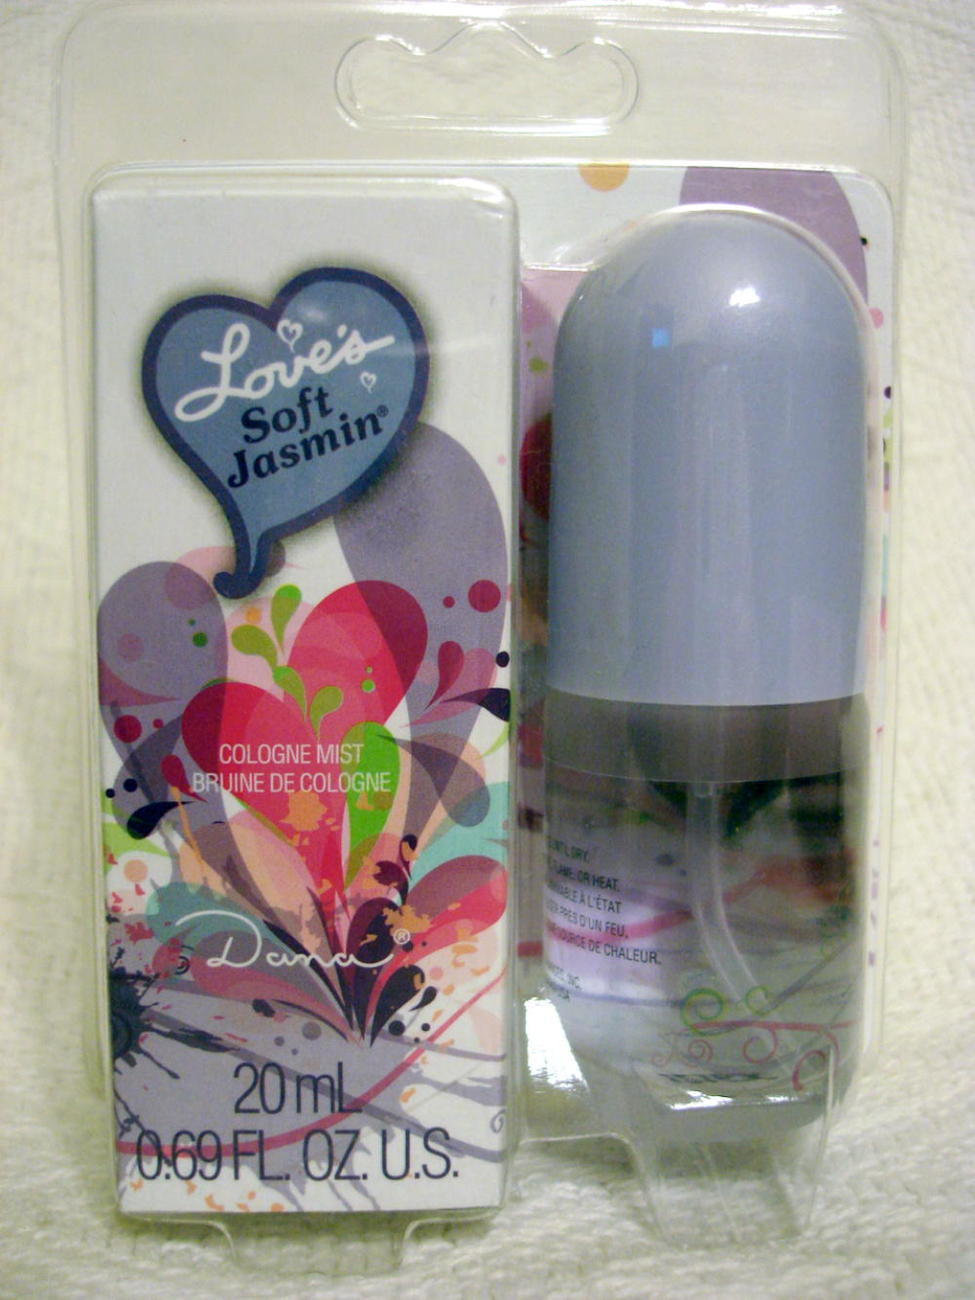 Baby Soft Perfume Gift Sets
 Loves Baby Soft Berry Sweet Soft Jasmin Set Cologne Mist